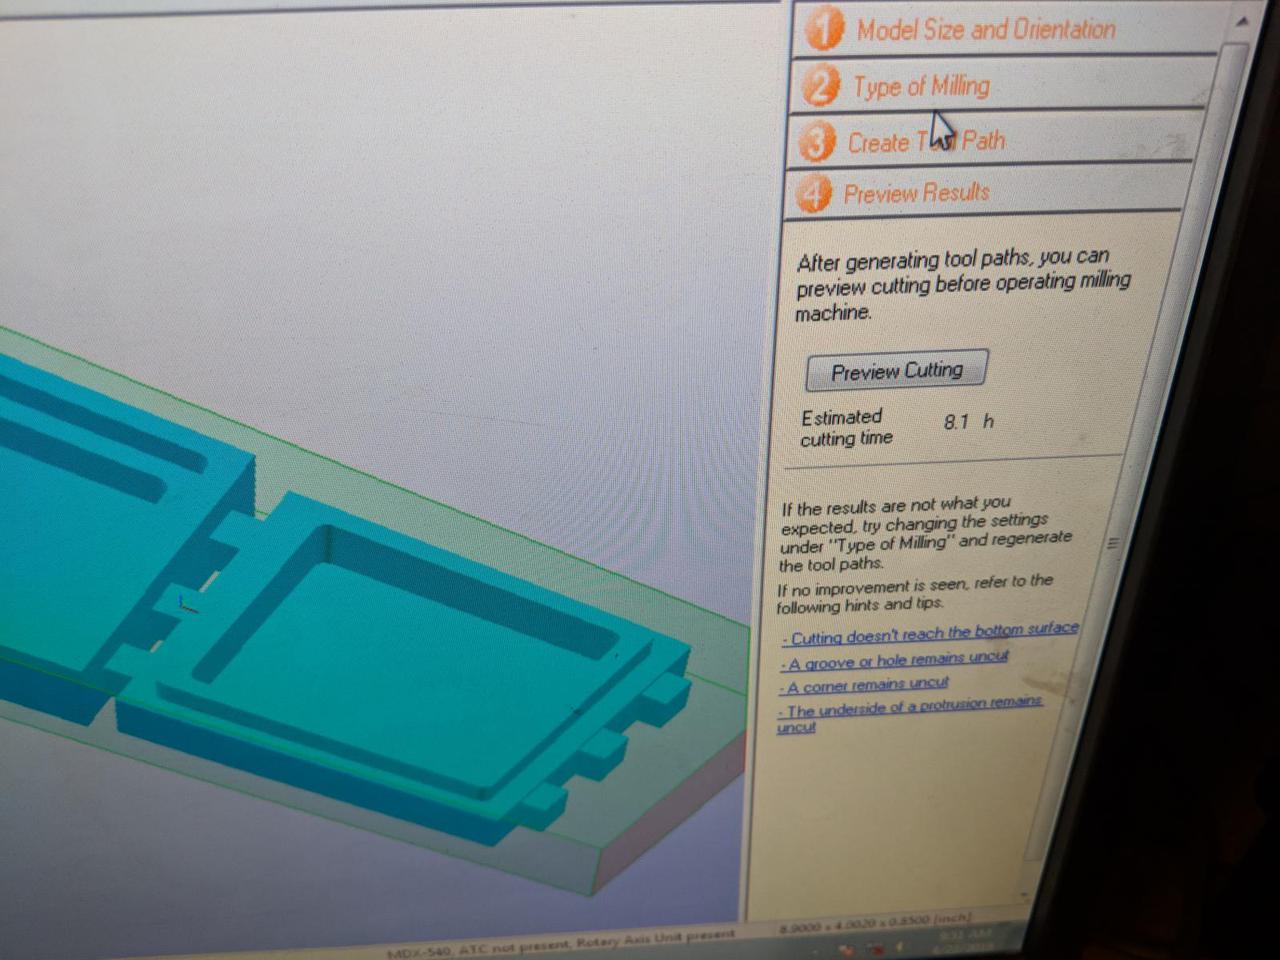 computer monitor showing the milling software estimating 8 hours to mill project